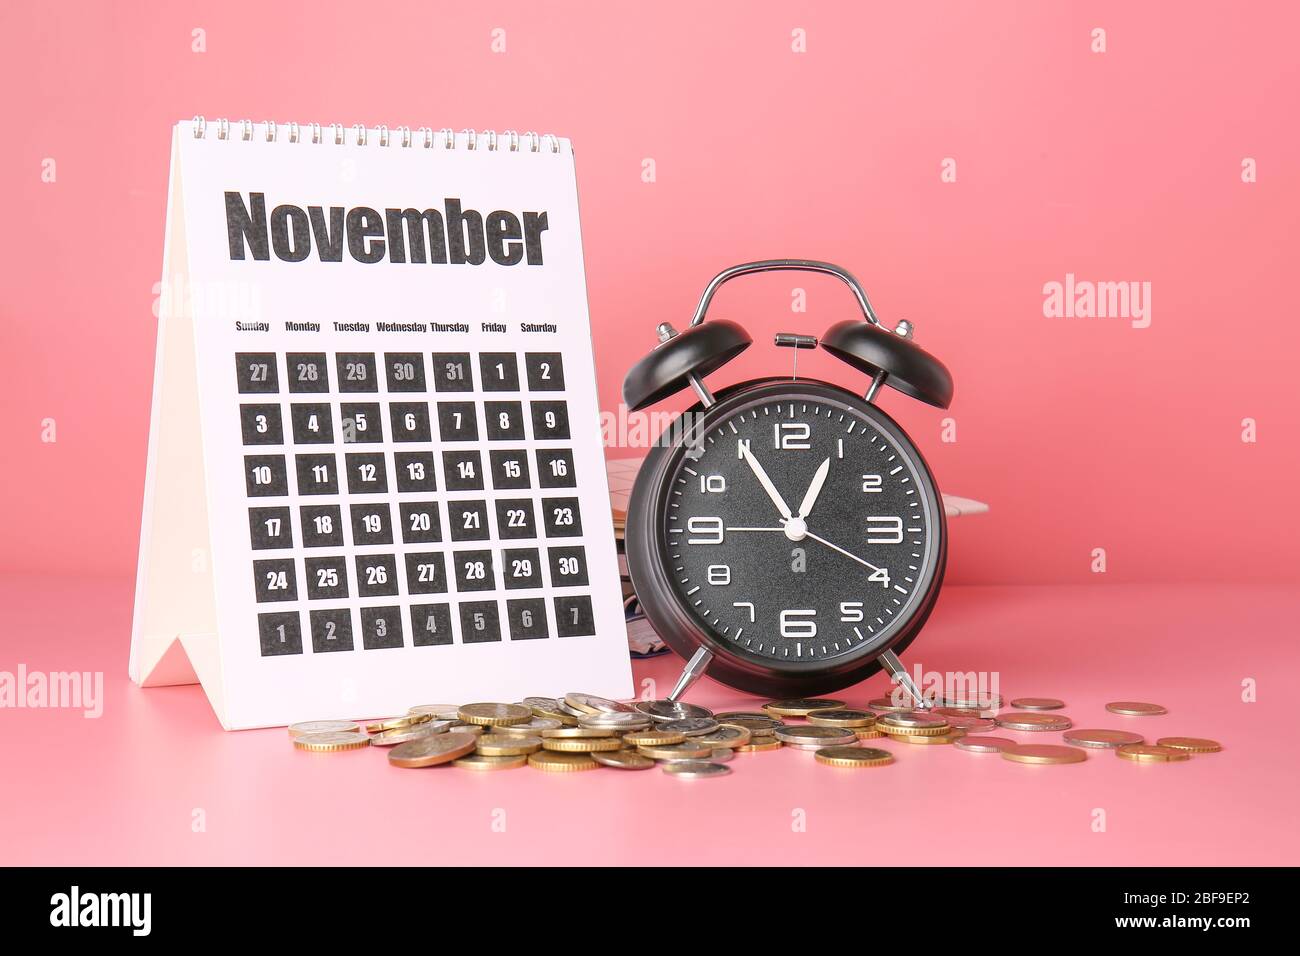 https://c8.alamy.com/comp/2BF9EP2/alarm-clock-calendar-and-coins-on-color-background-time-management-concept-2BF9EP2.jpg